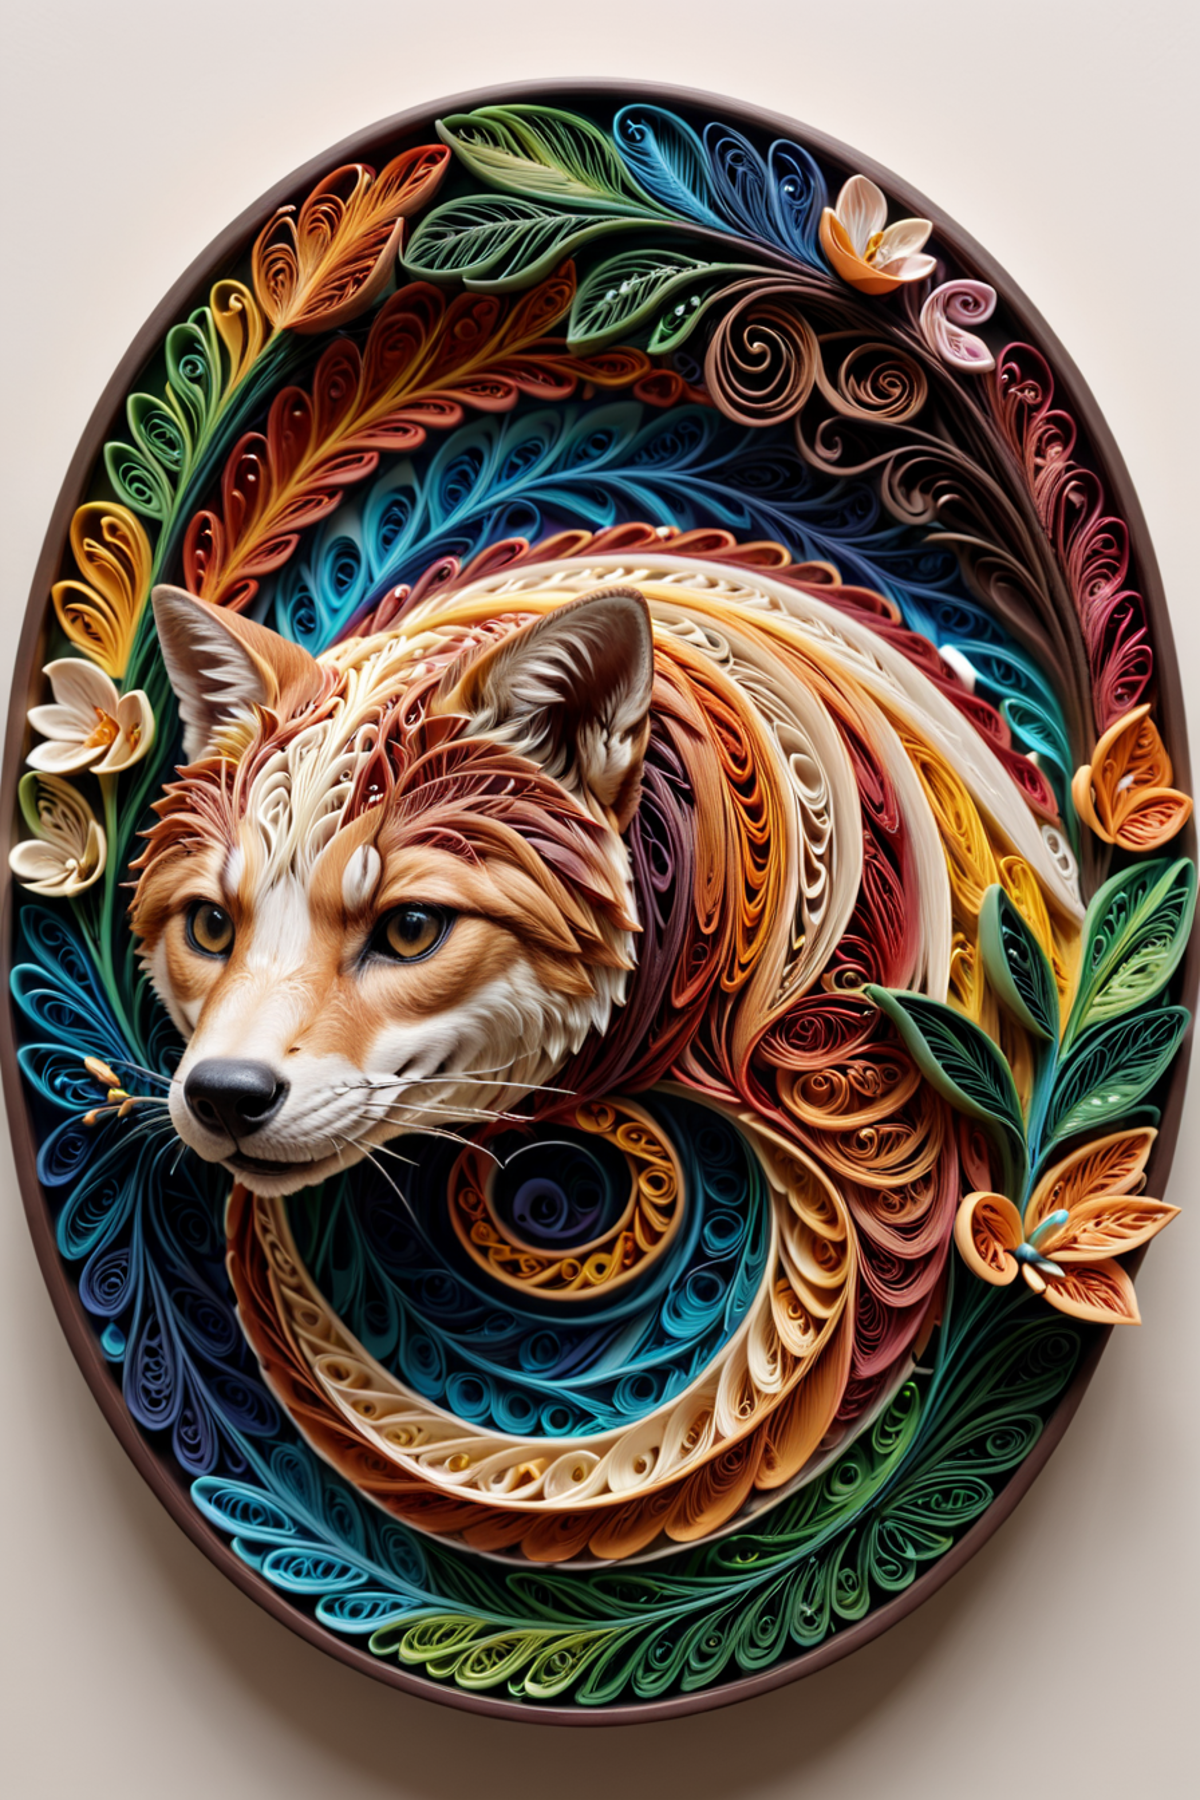 Colorful Paper Art of a Fox